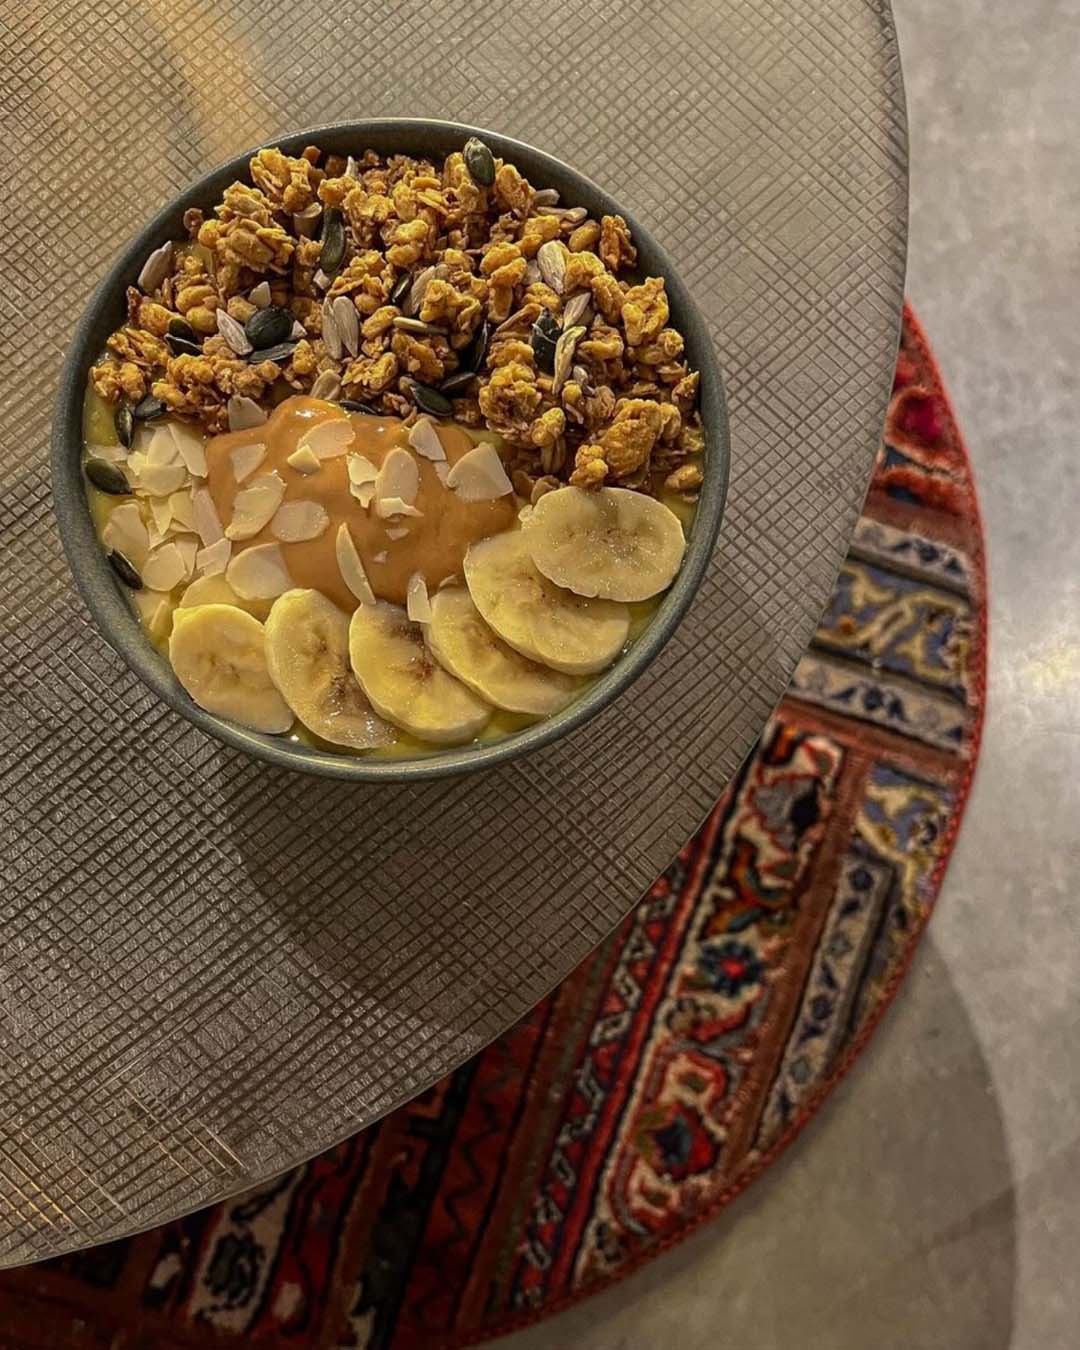 The best coffee shops in Dubai | A smoothie bowl packed with banana, berries and oats